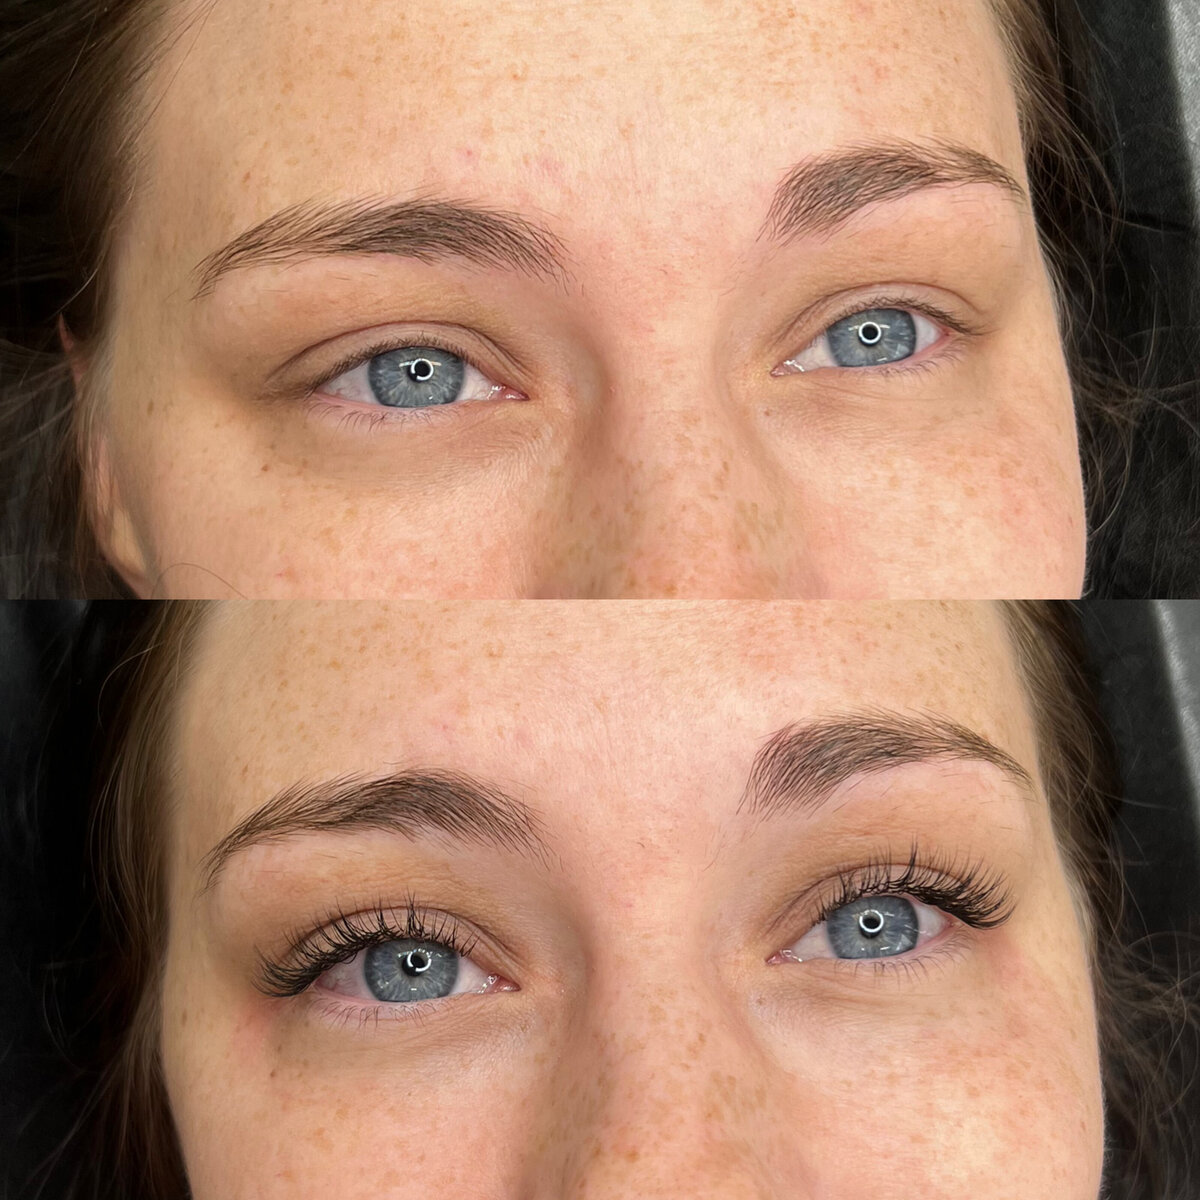 woman with blue eyes and lash extensions (before and after)